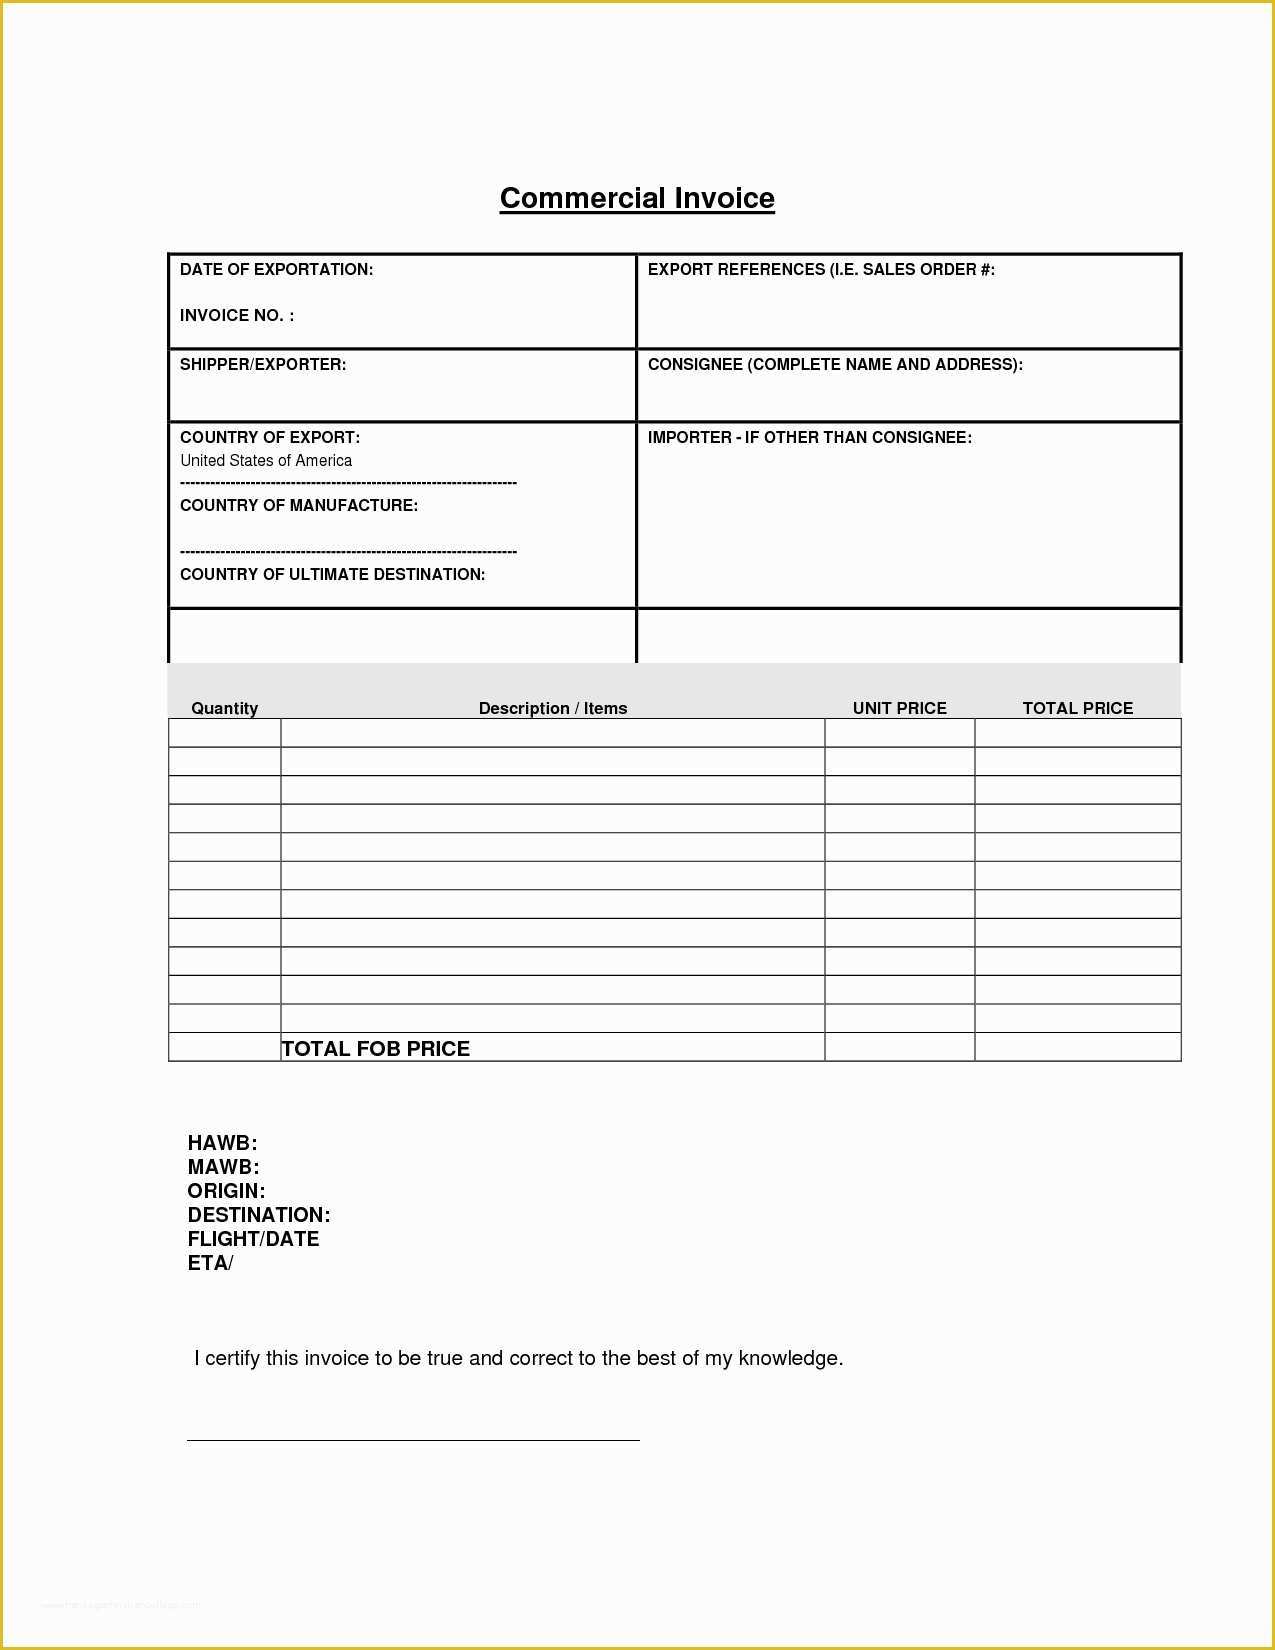 Fill In the Blank Invoice Template Free Of Mercial Invoice Template Excel Invoice Design Inspiration